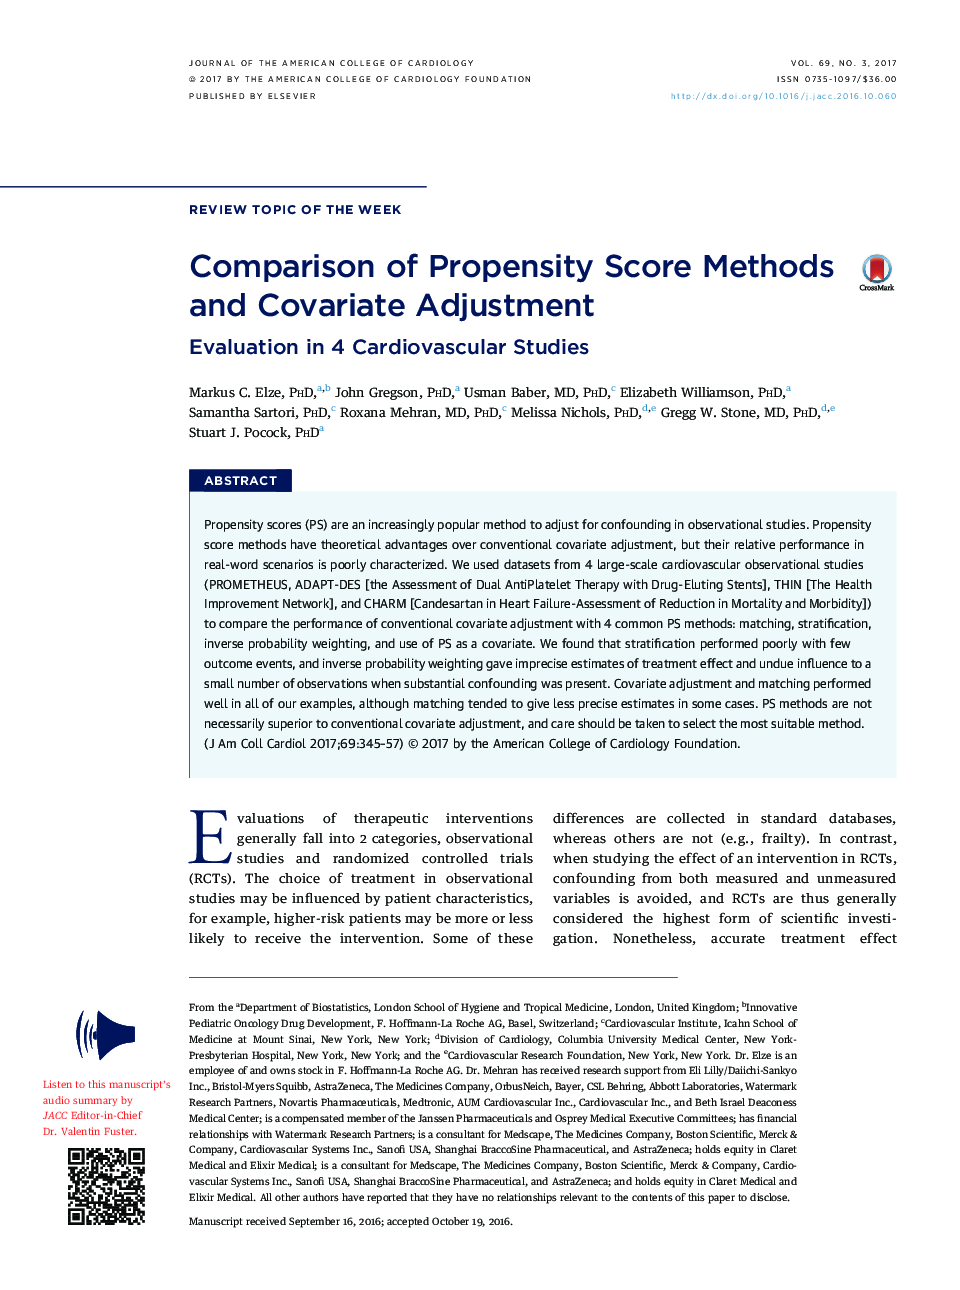 Comparison of Propensity Score Methods and Covariate Adjustment